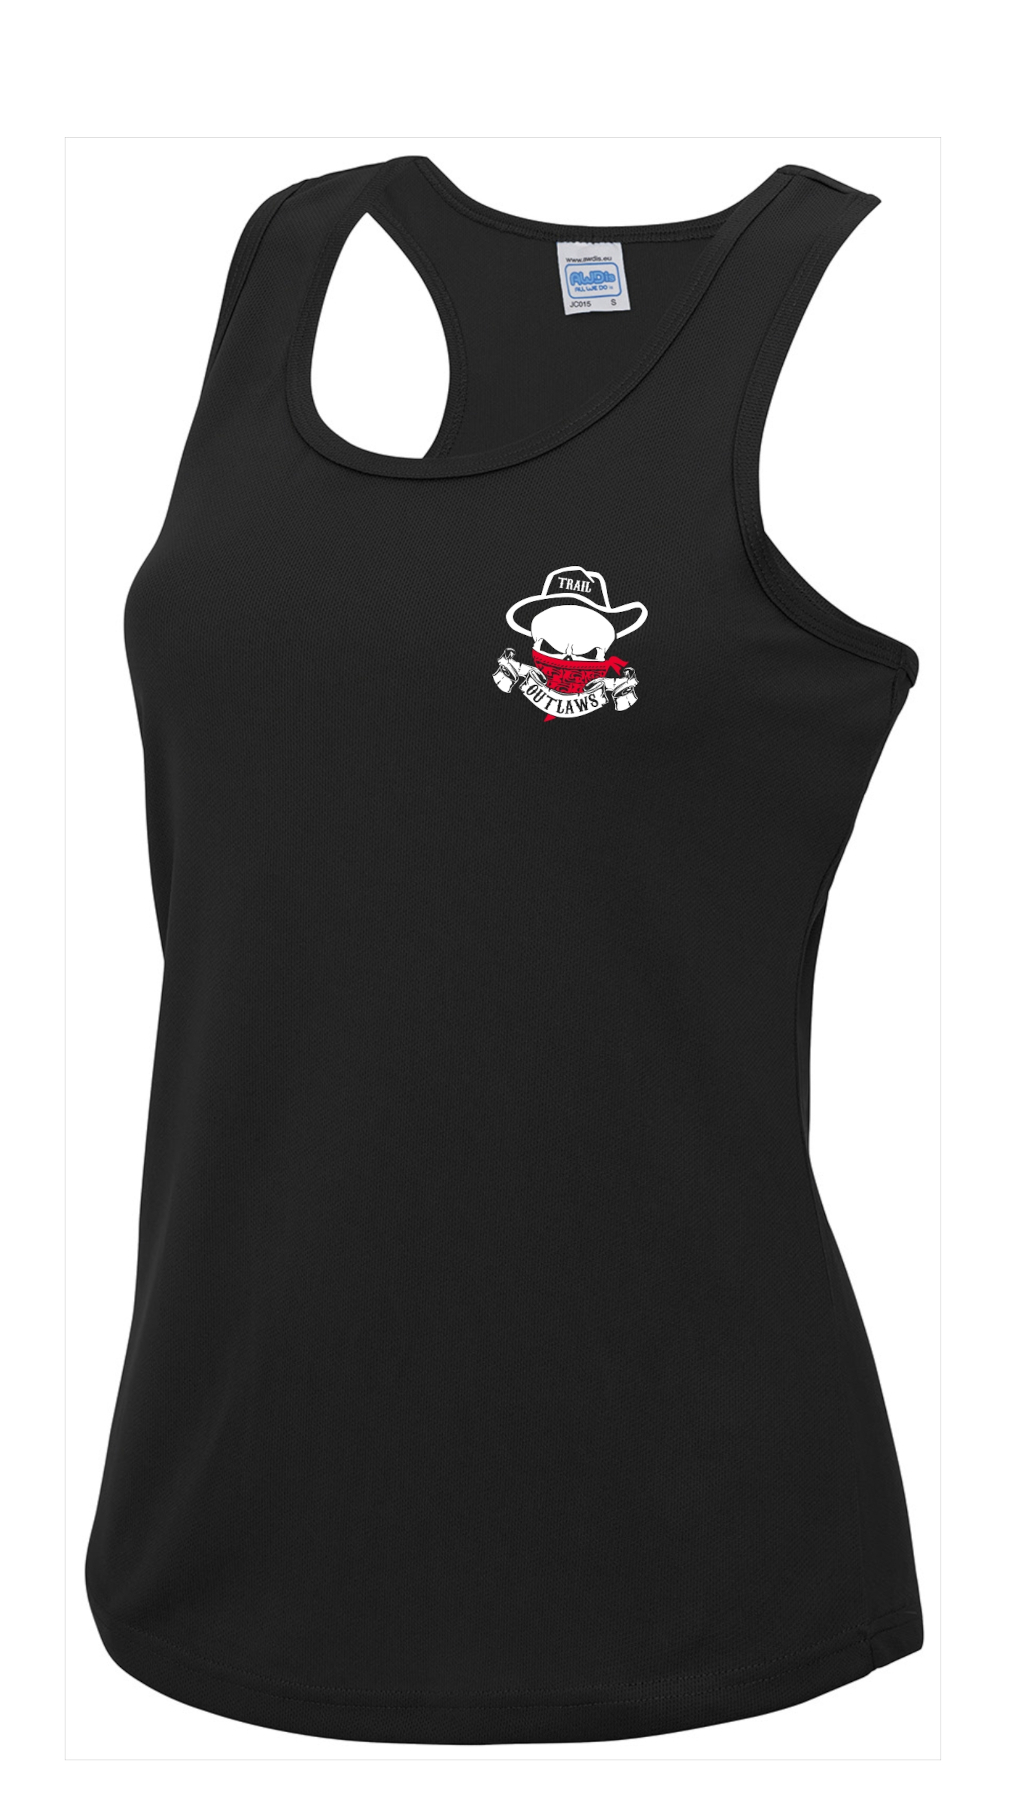 Womens Trail Outlaws Running Vest 